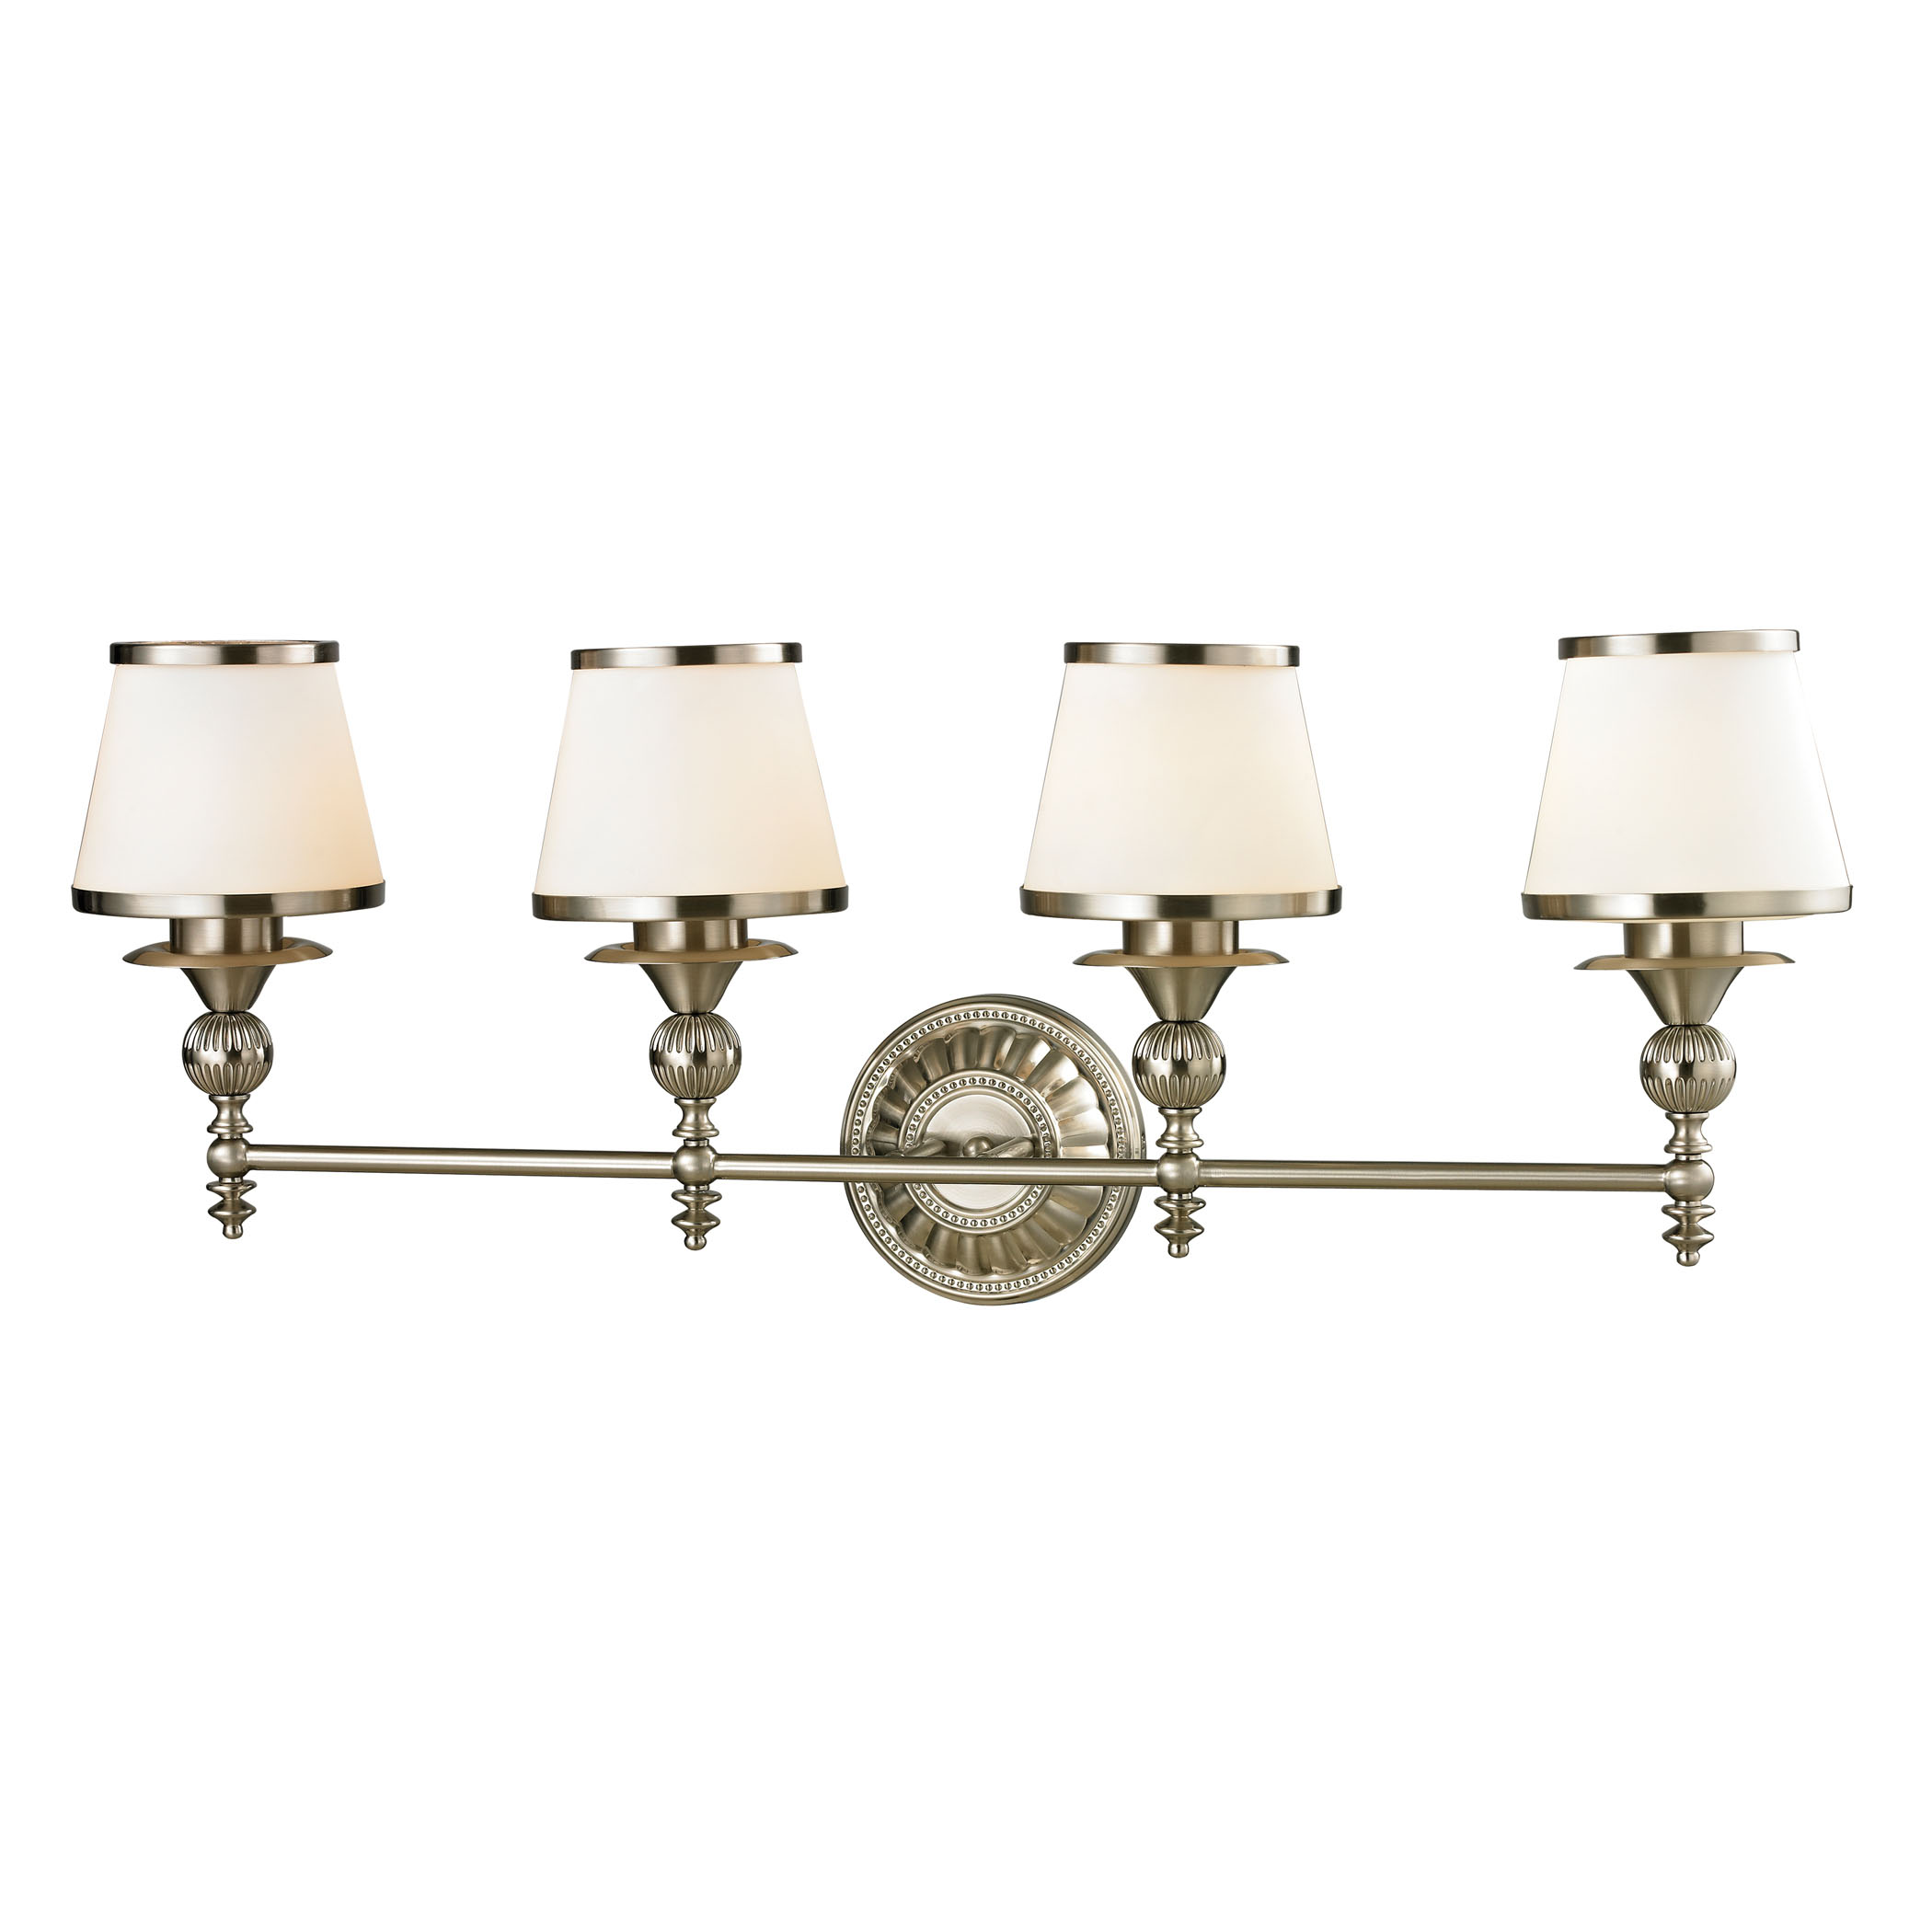 Smithfield Collection 4 Light Bath in Brushed Nickel